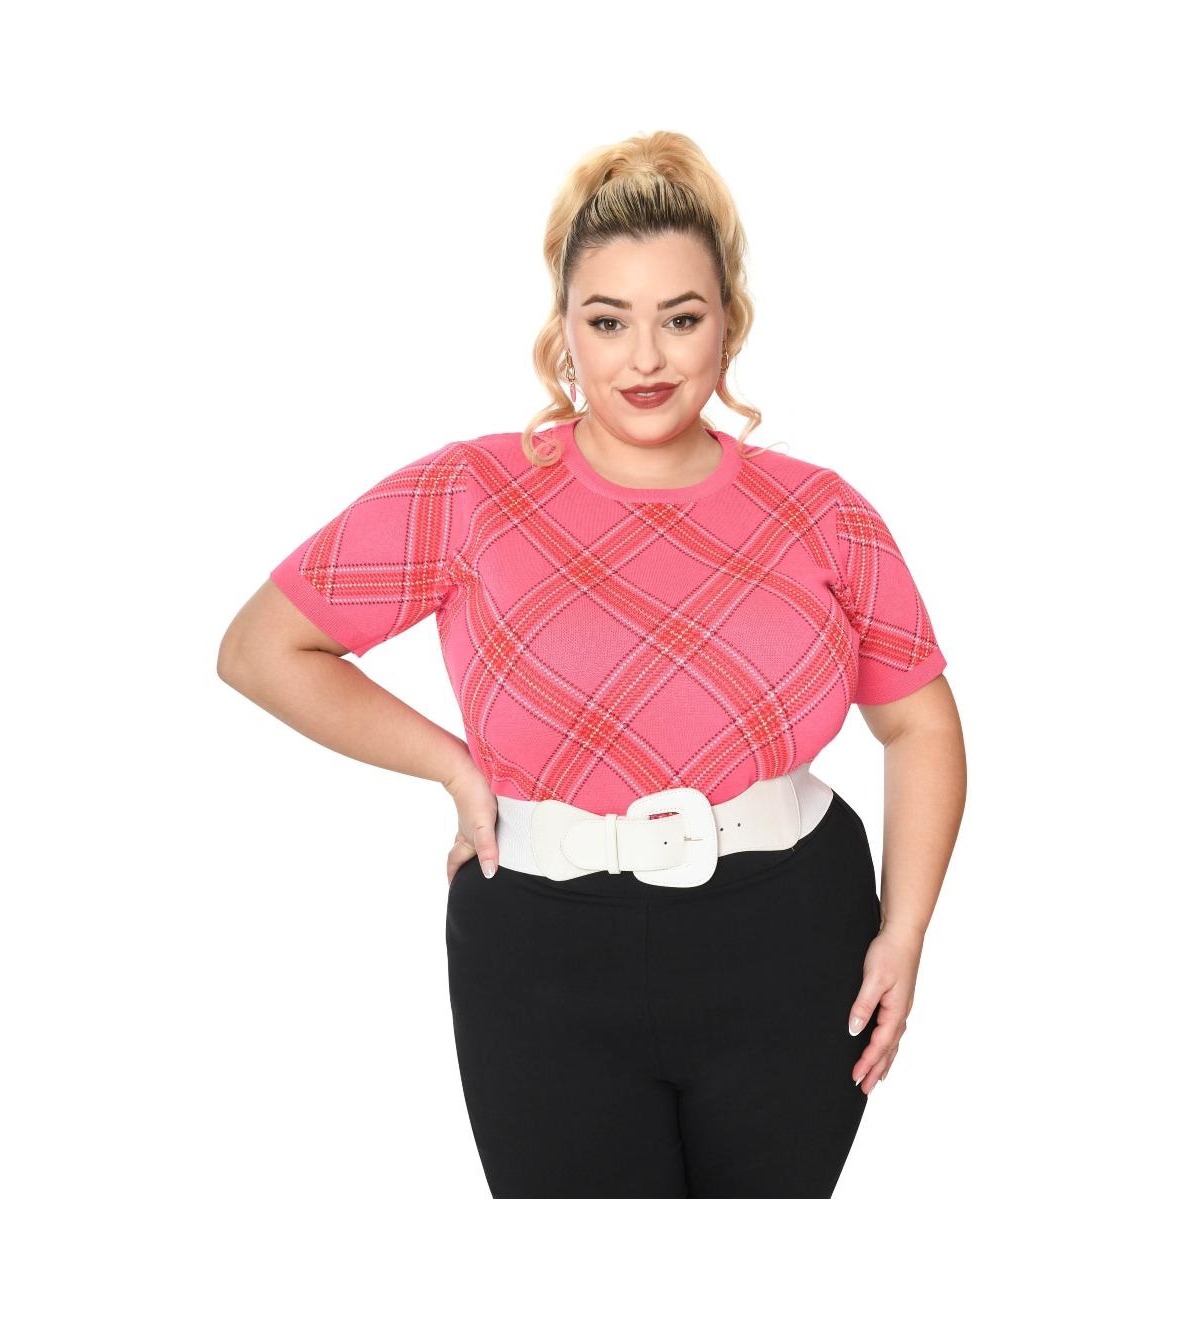 Plus Size Patterned Short Sleeve Sweater - Hot pink/red/white bias plaid